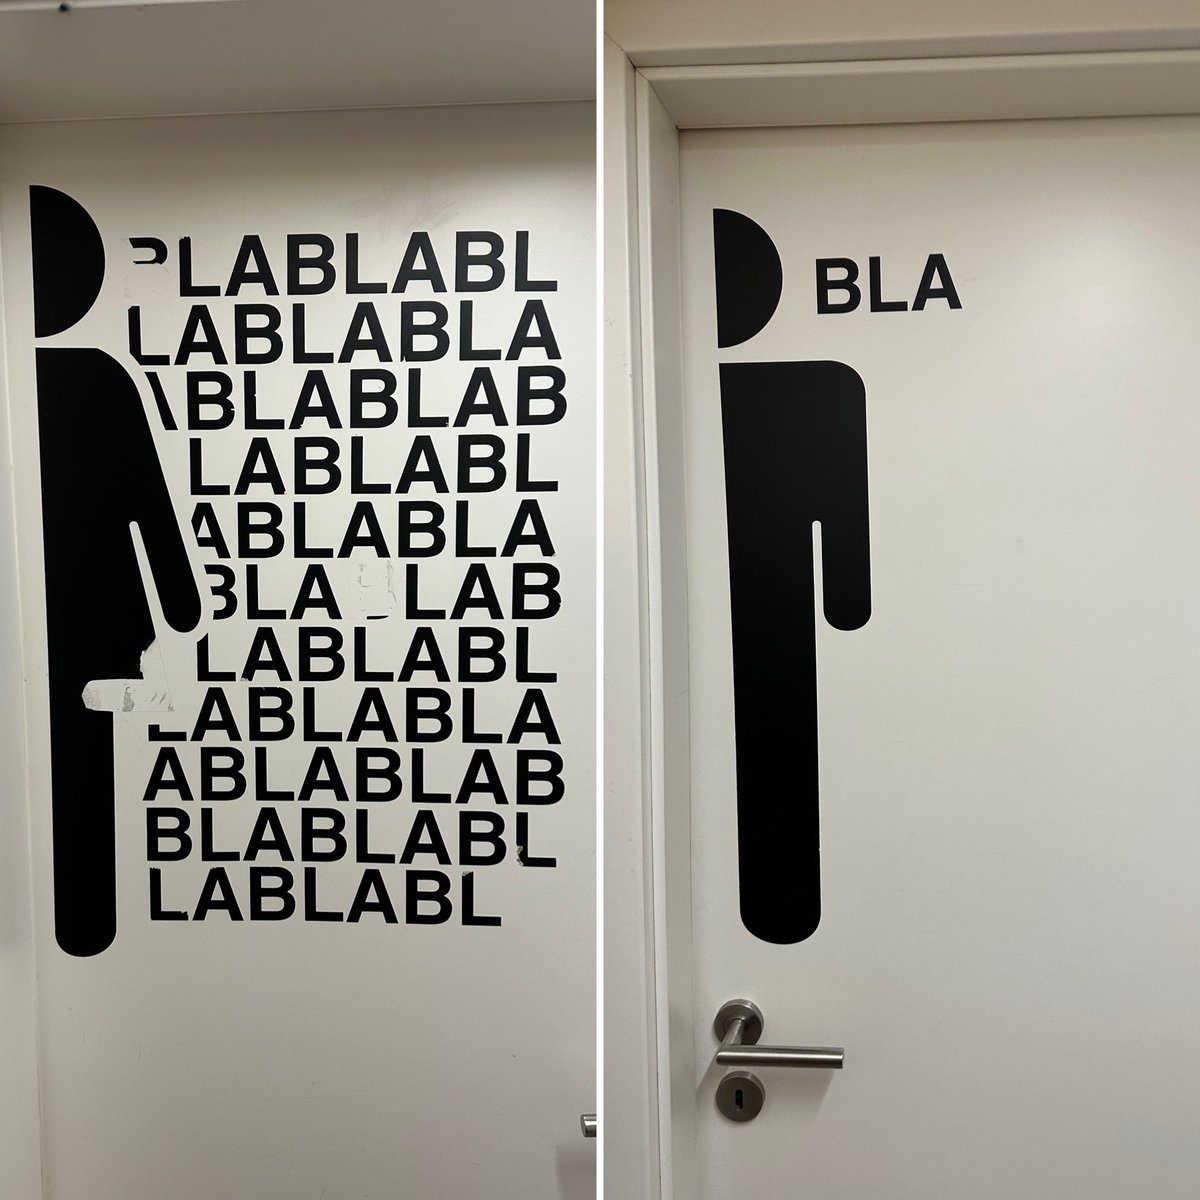 Distinguishing between female and male toilets in Germany